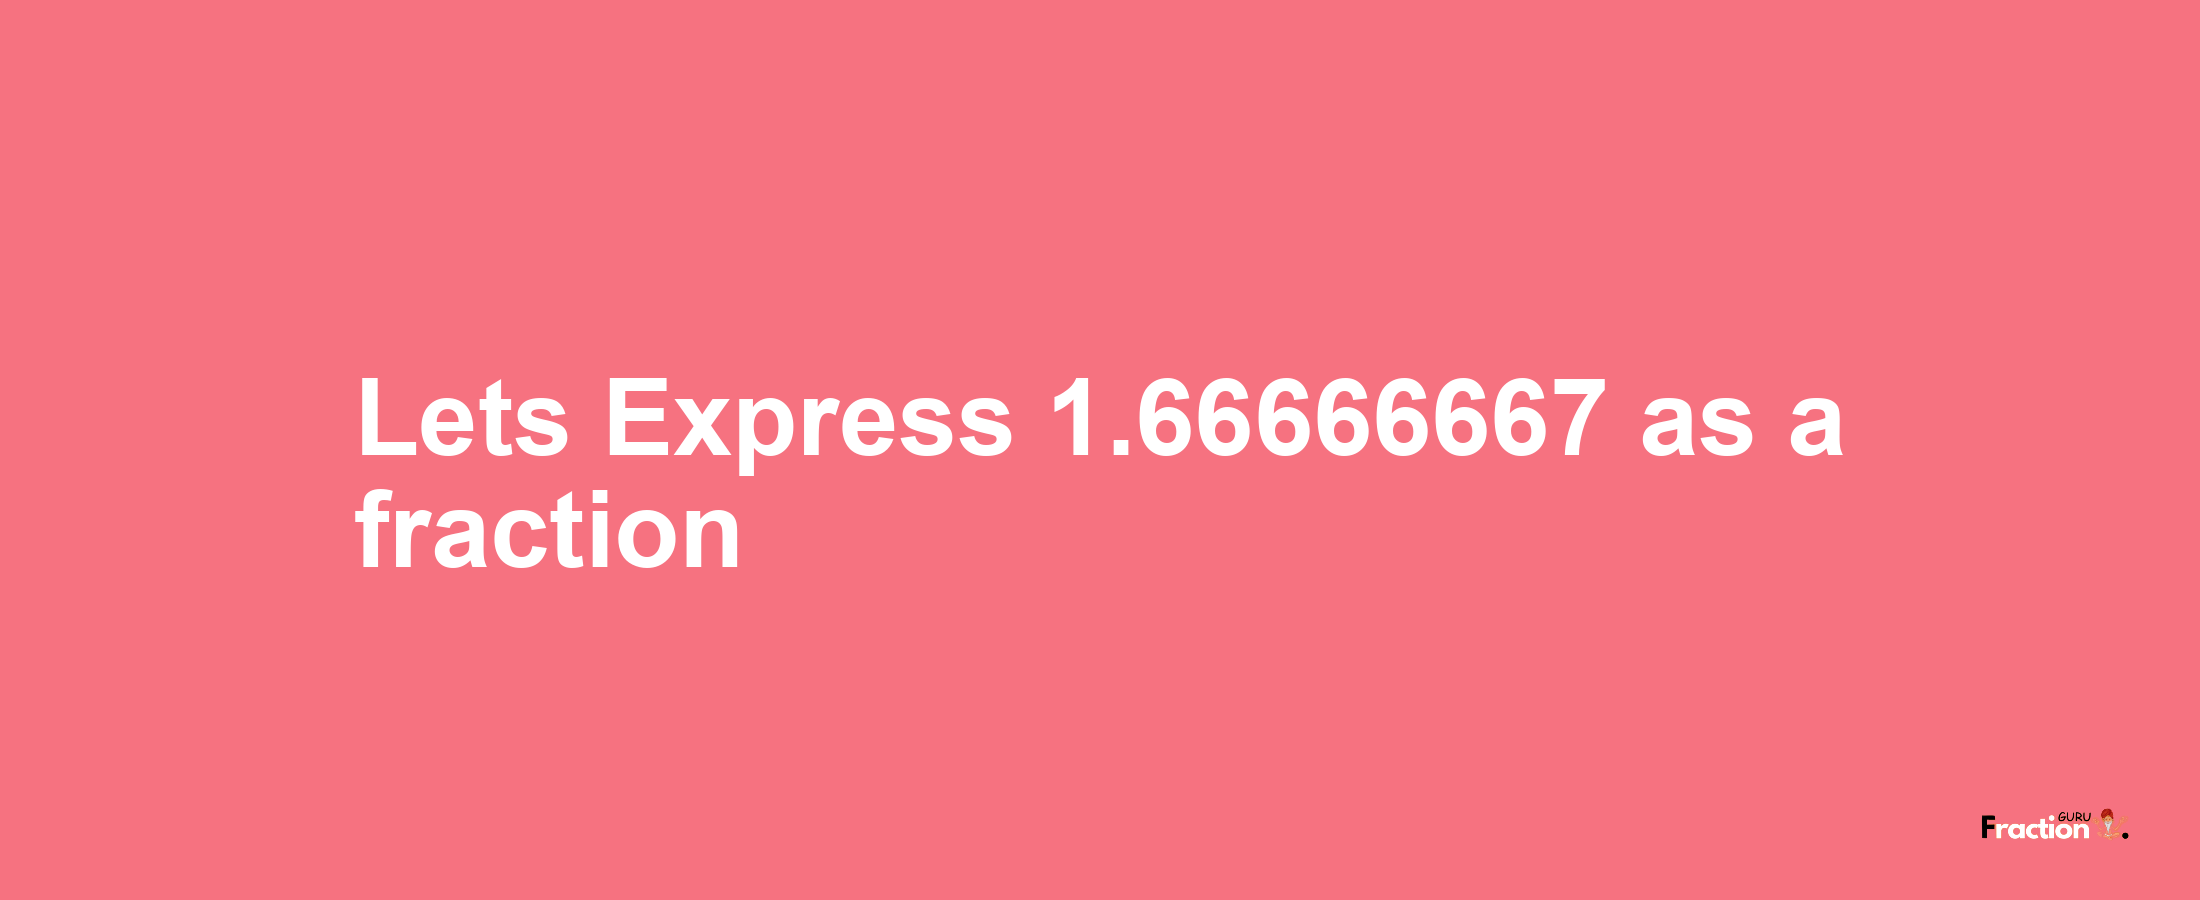 Lets Express 1.66666667 as afraction